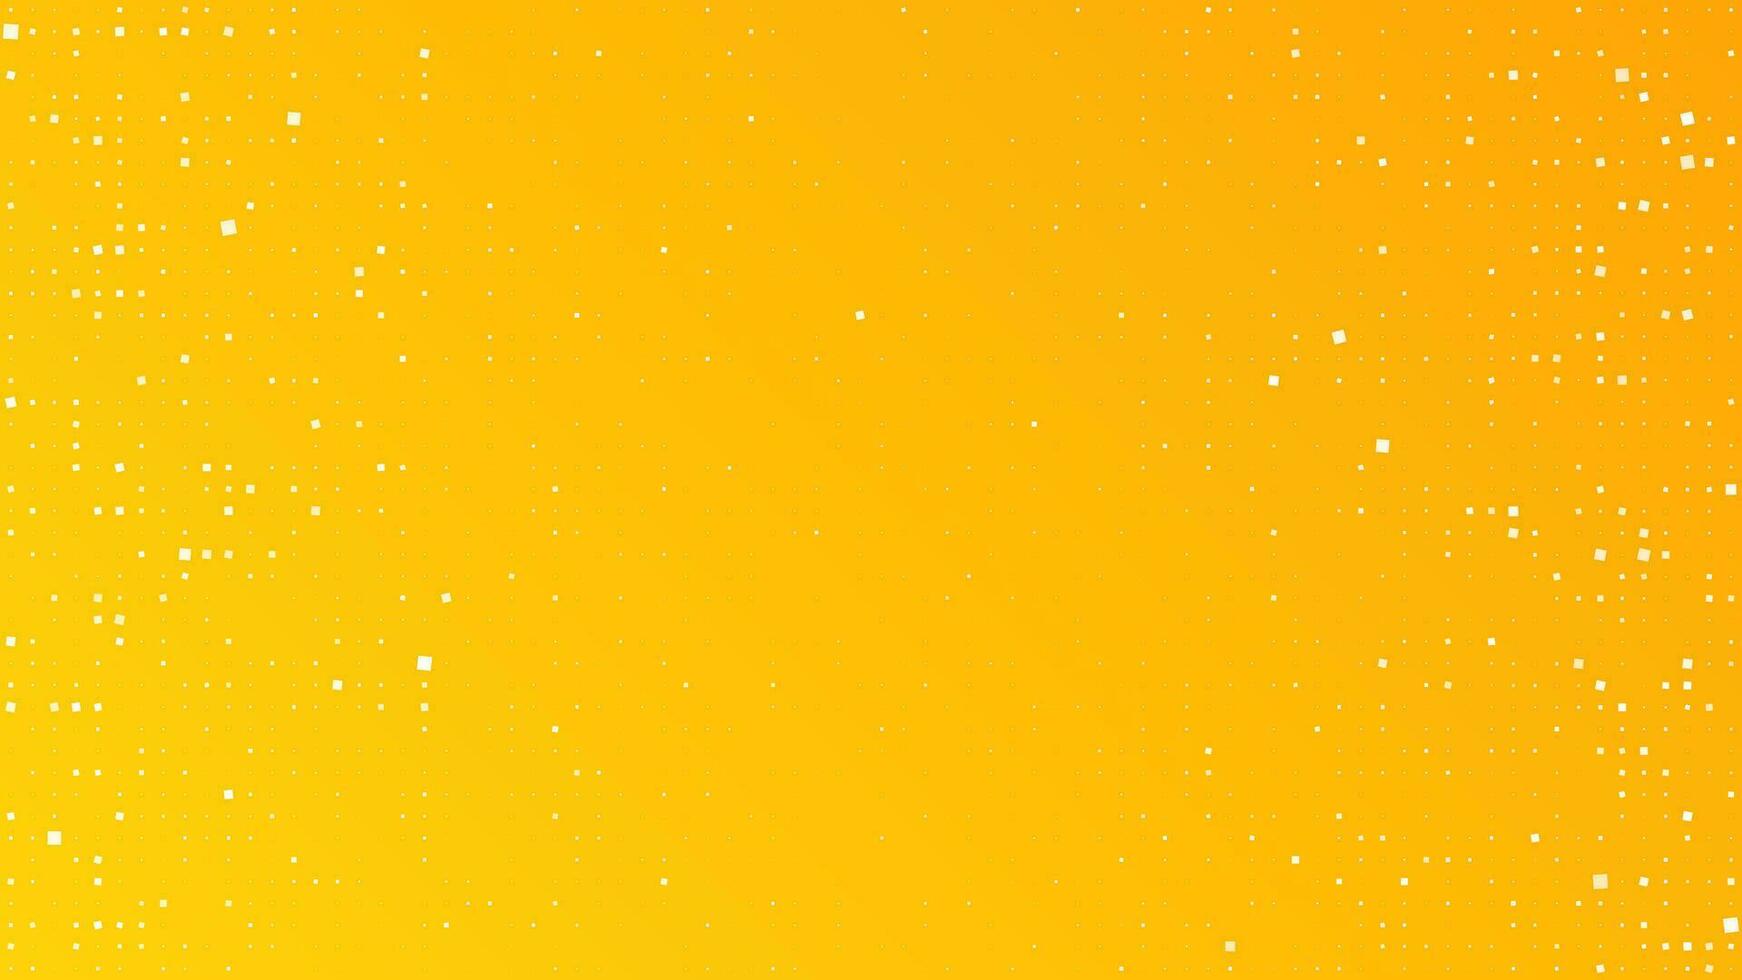 Abstract geometric background of squares. Yellow pixel background with empty space. Vector illustration.